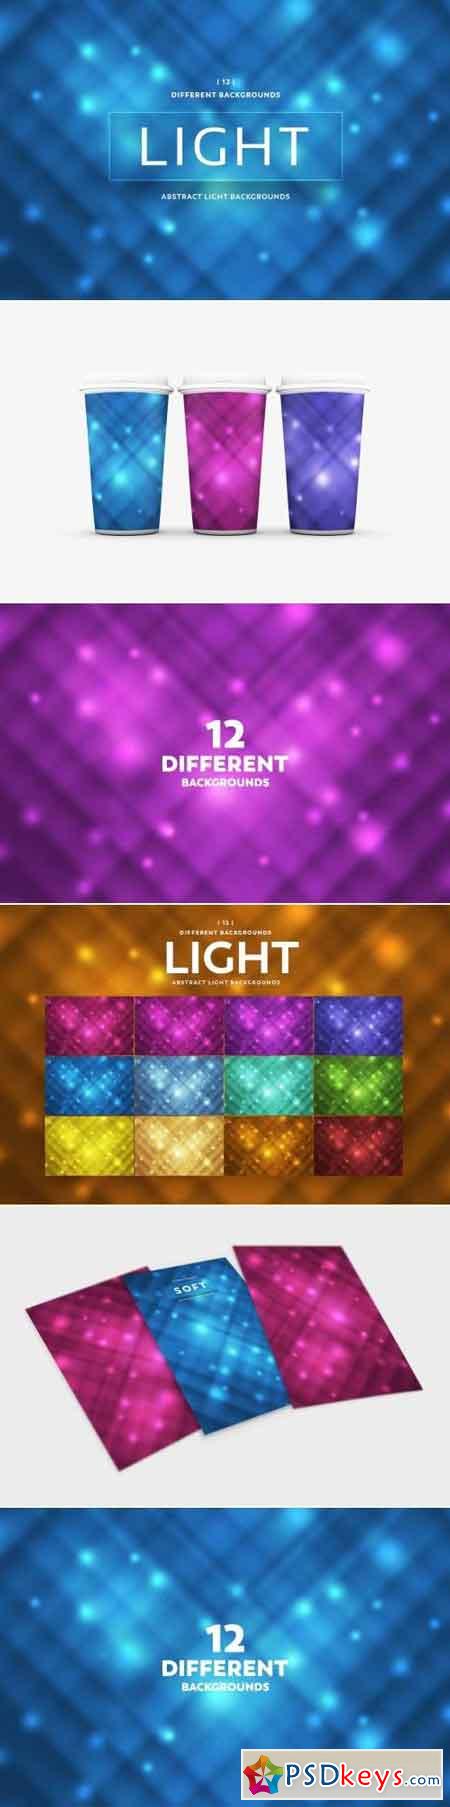 Abstract Light Backgrounds